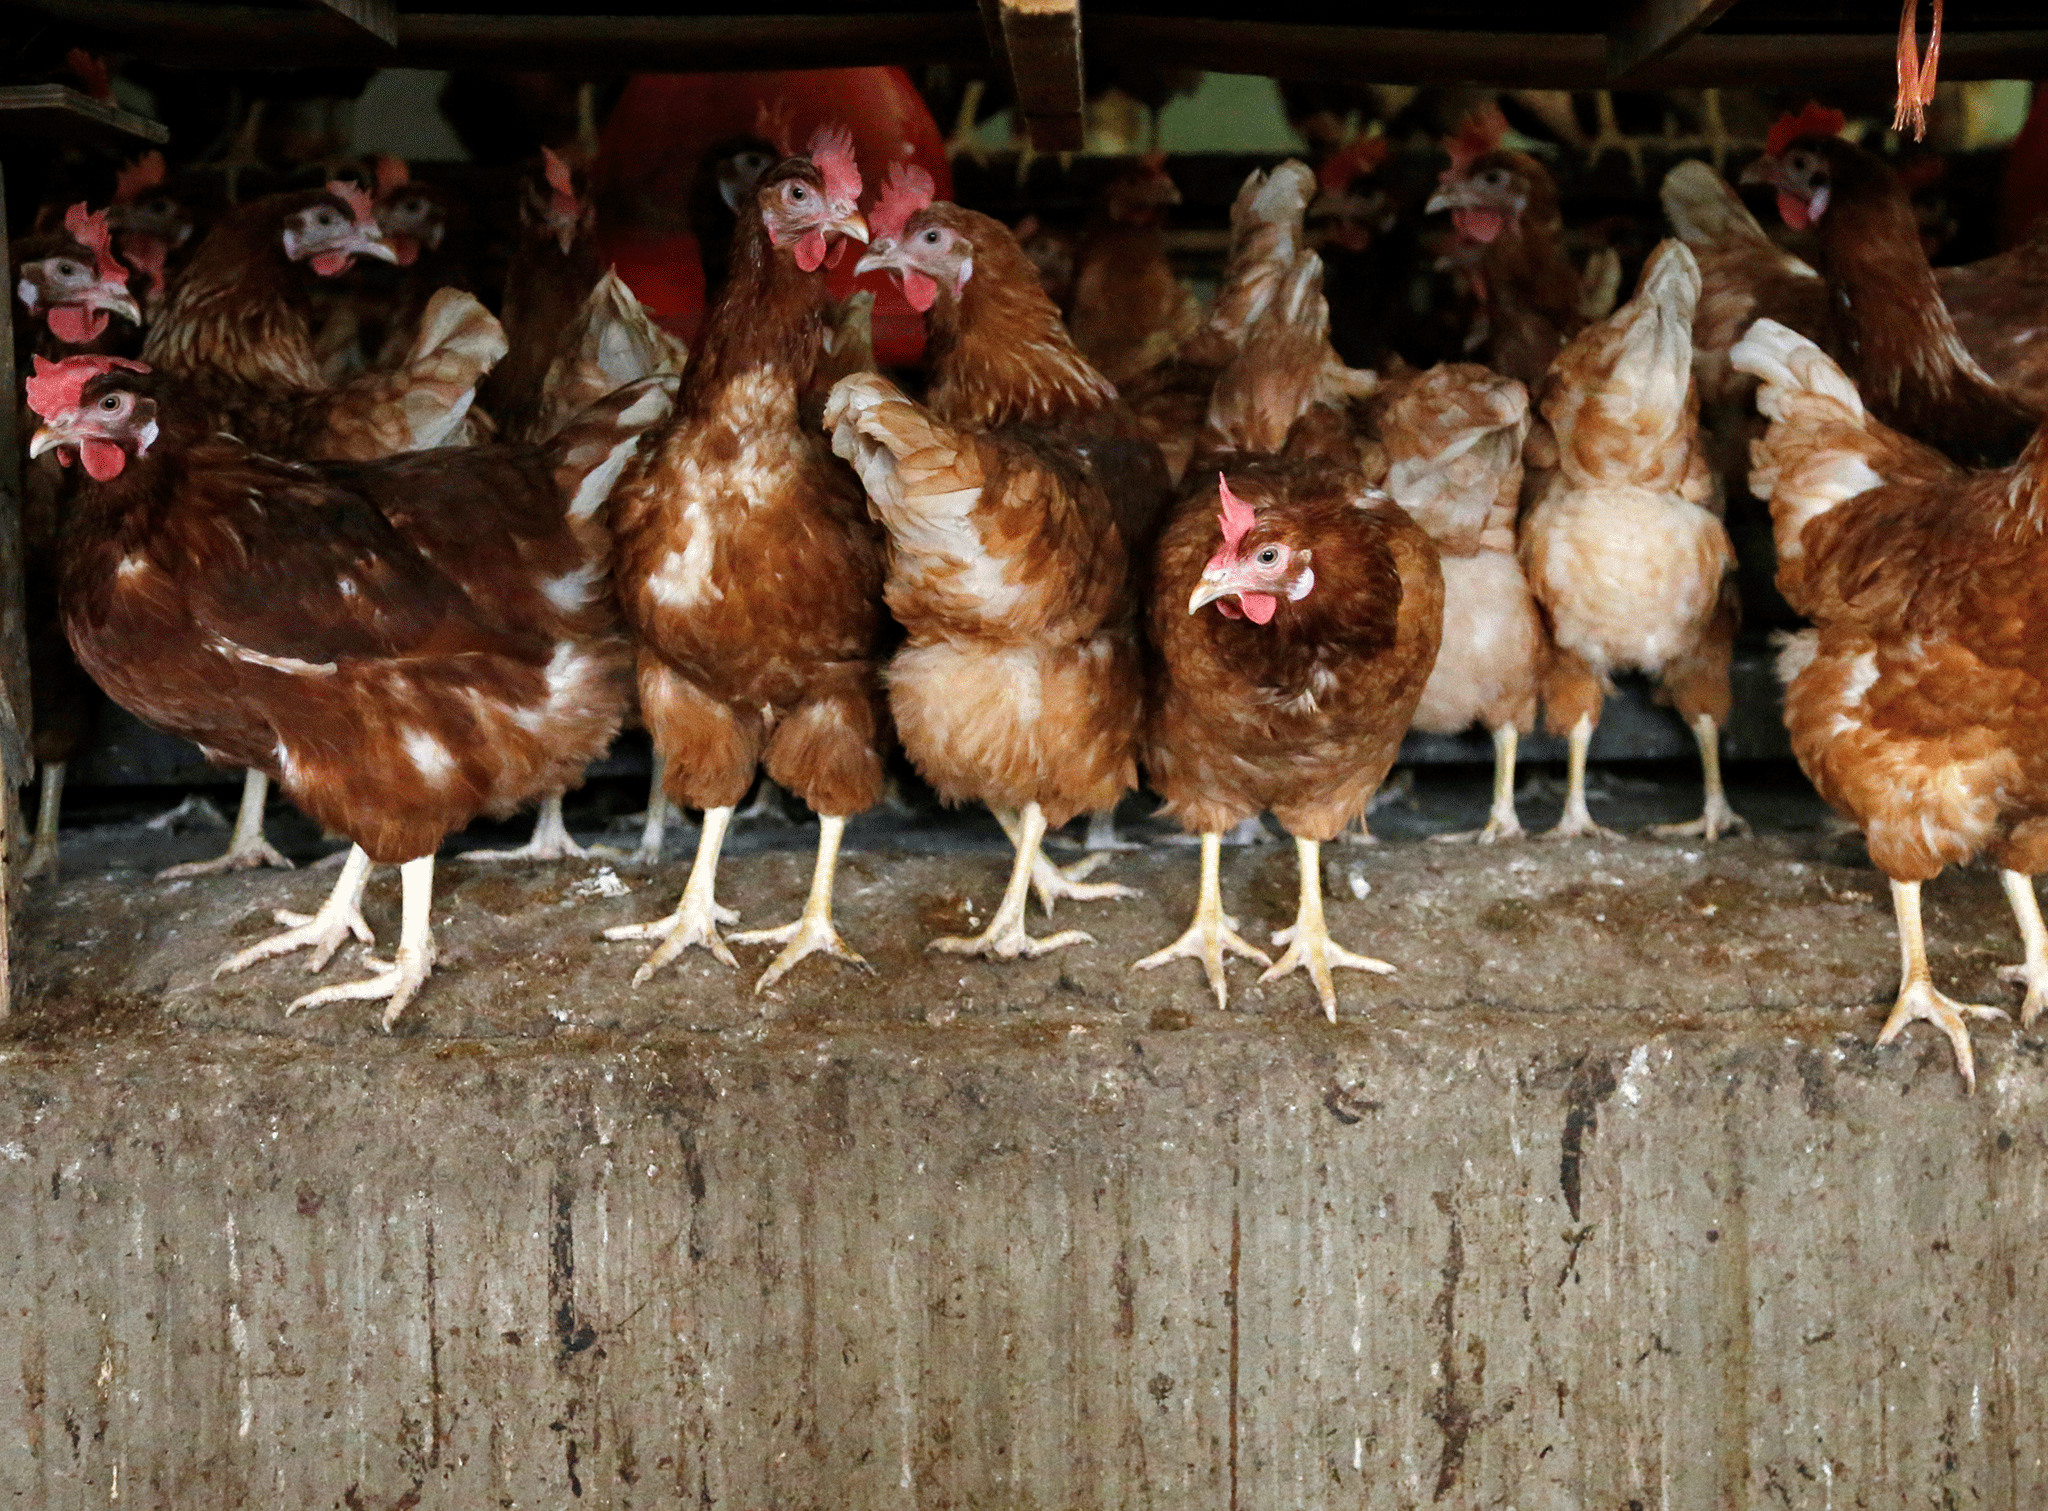 Hens are pictured at a poultry farm in Lunteren, Netherlands, 7 August, 2017